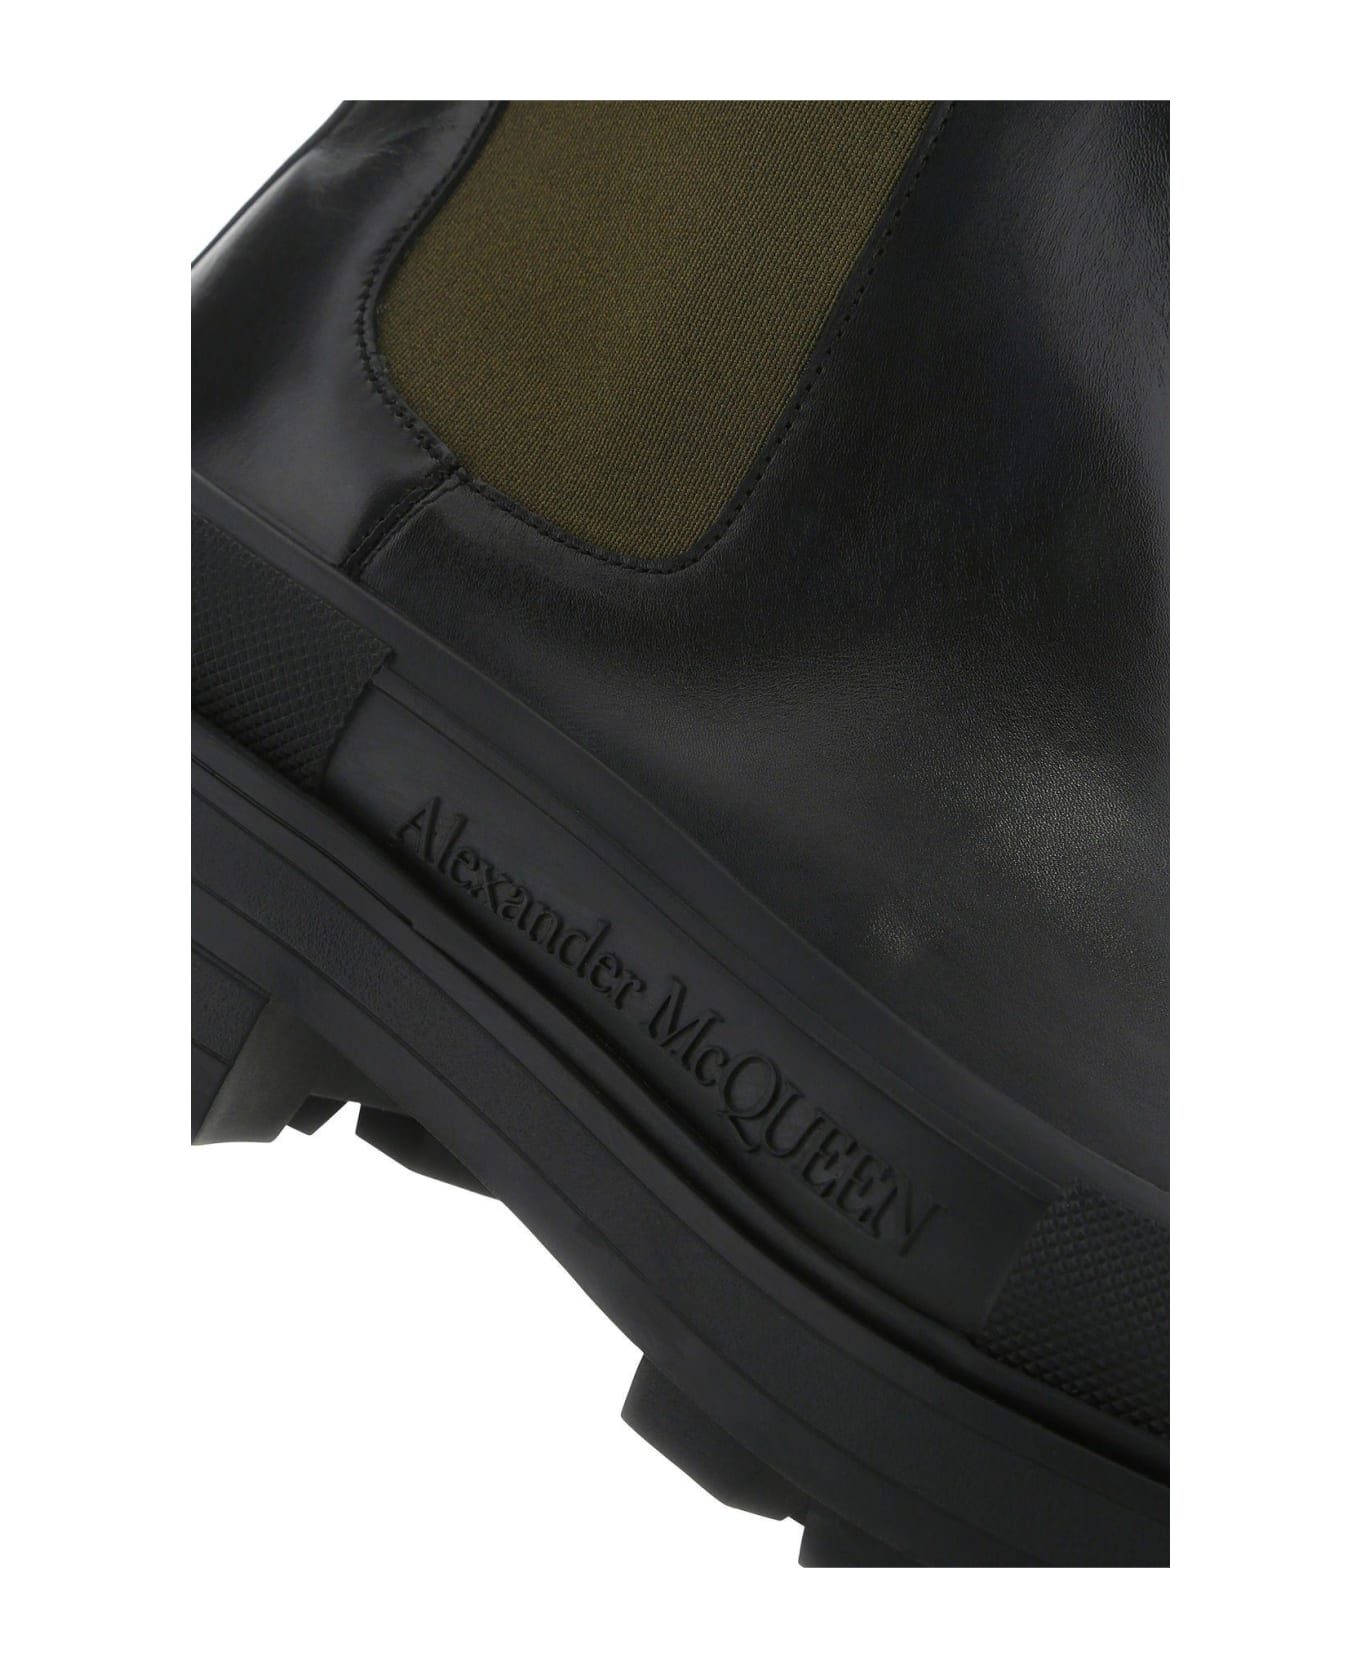 Alexander McQueen Black Leather Boxcar Ankle Boots - BLACK